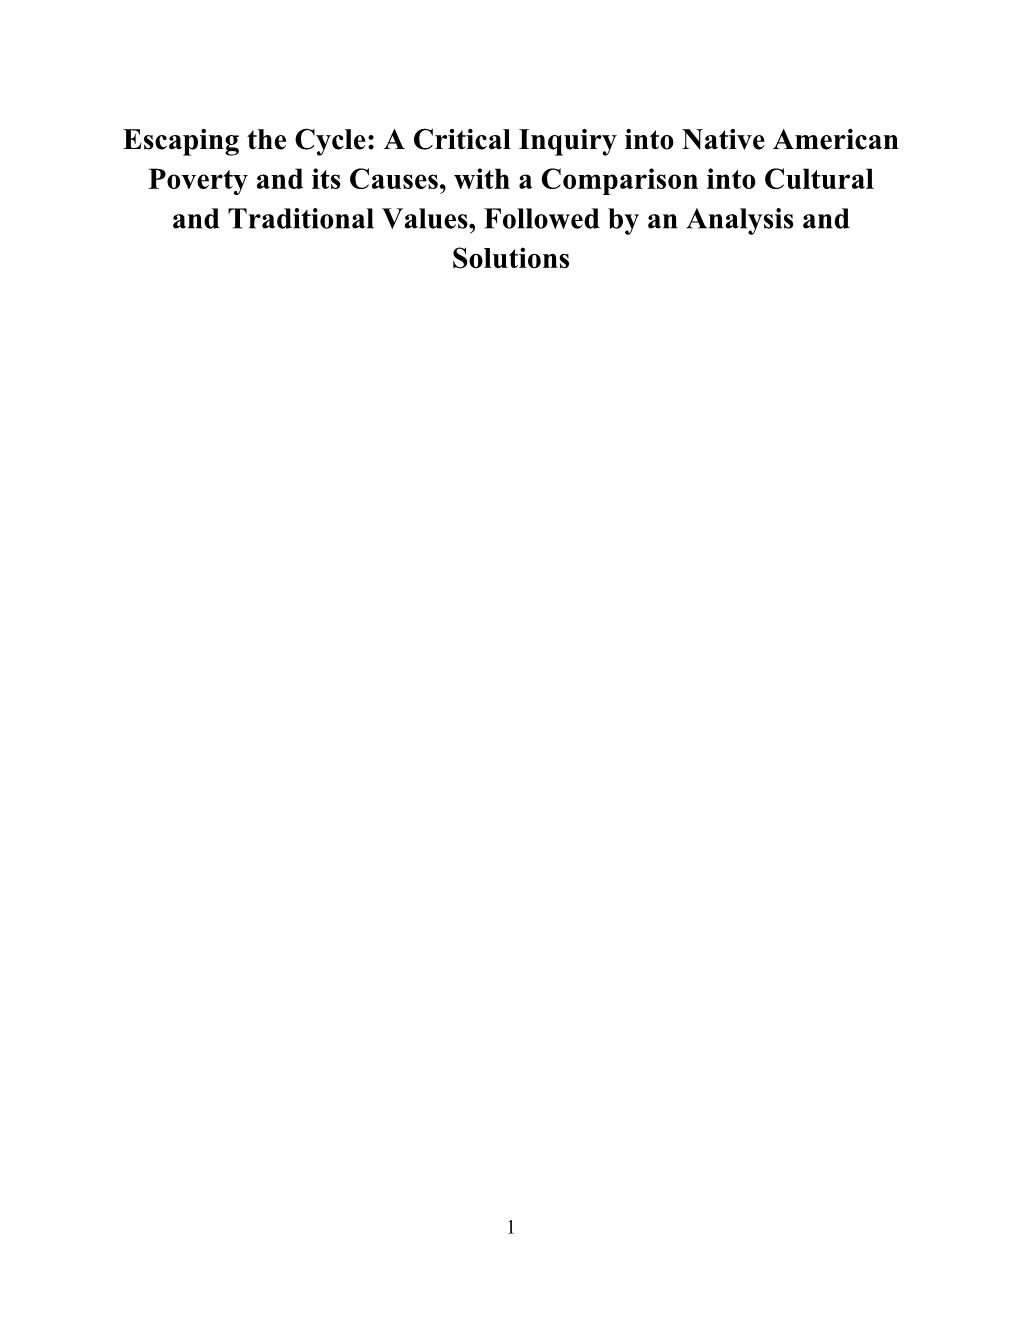 Escaping the Cycle: a Critical Inquiry Into Native American Poverty and Its Causes, with a Comparison Into Cultural and Traditio